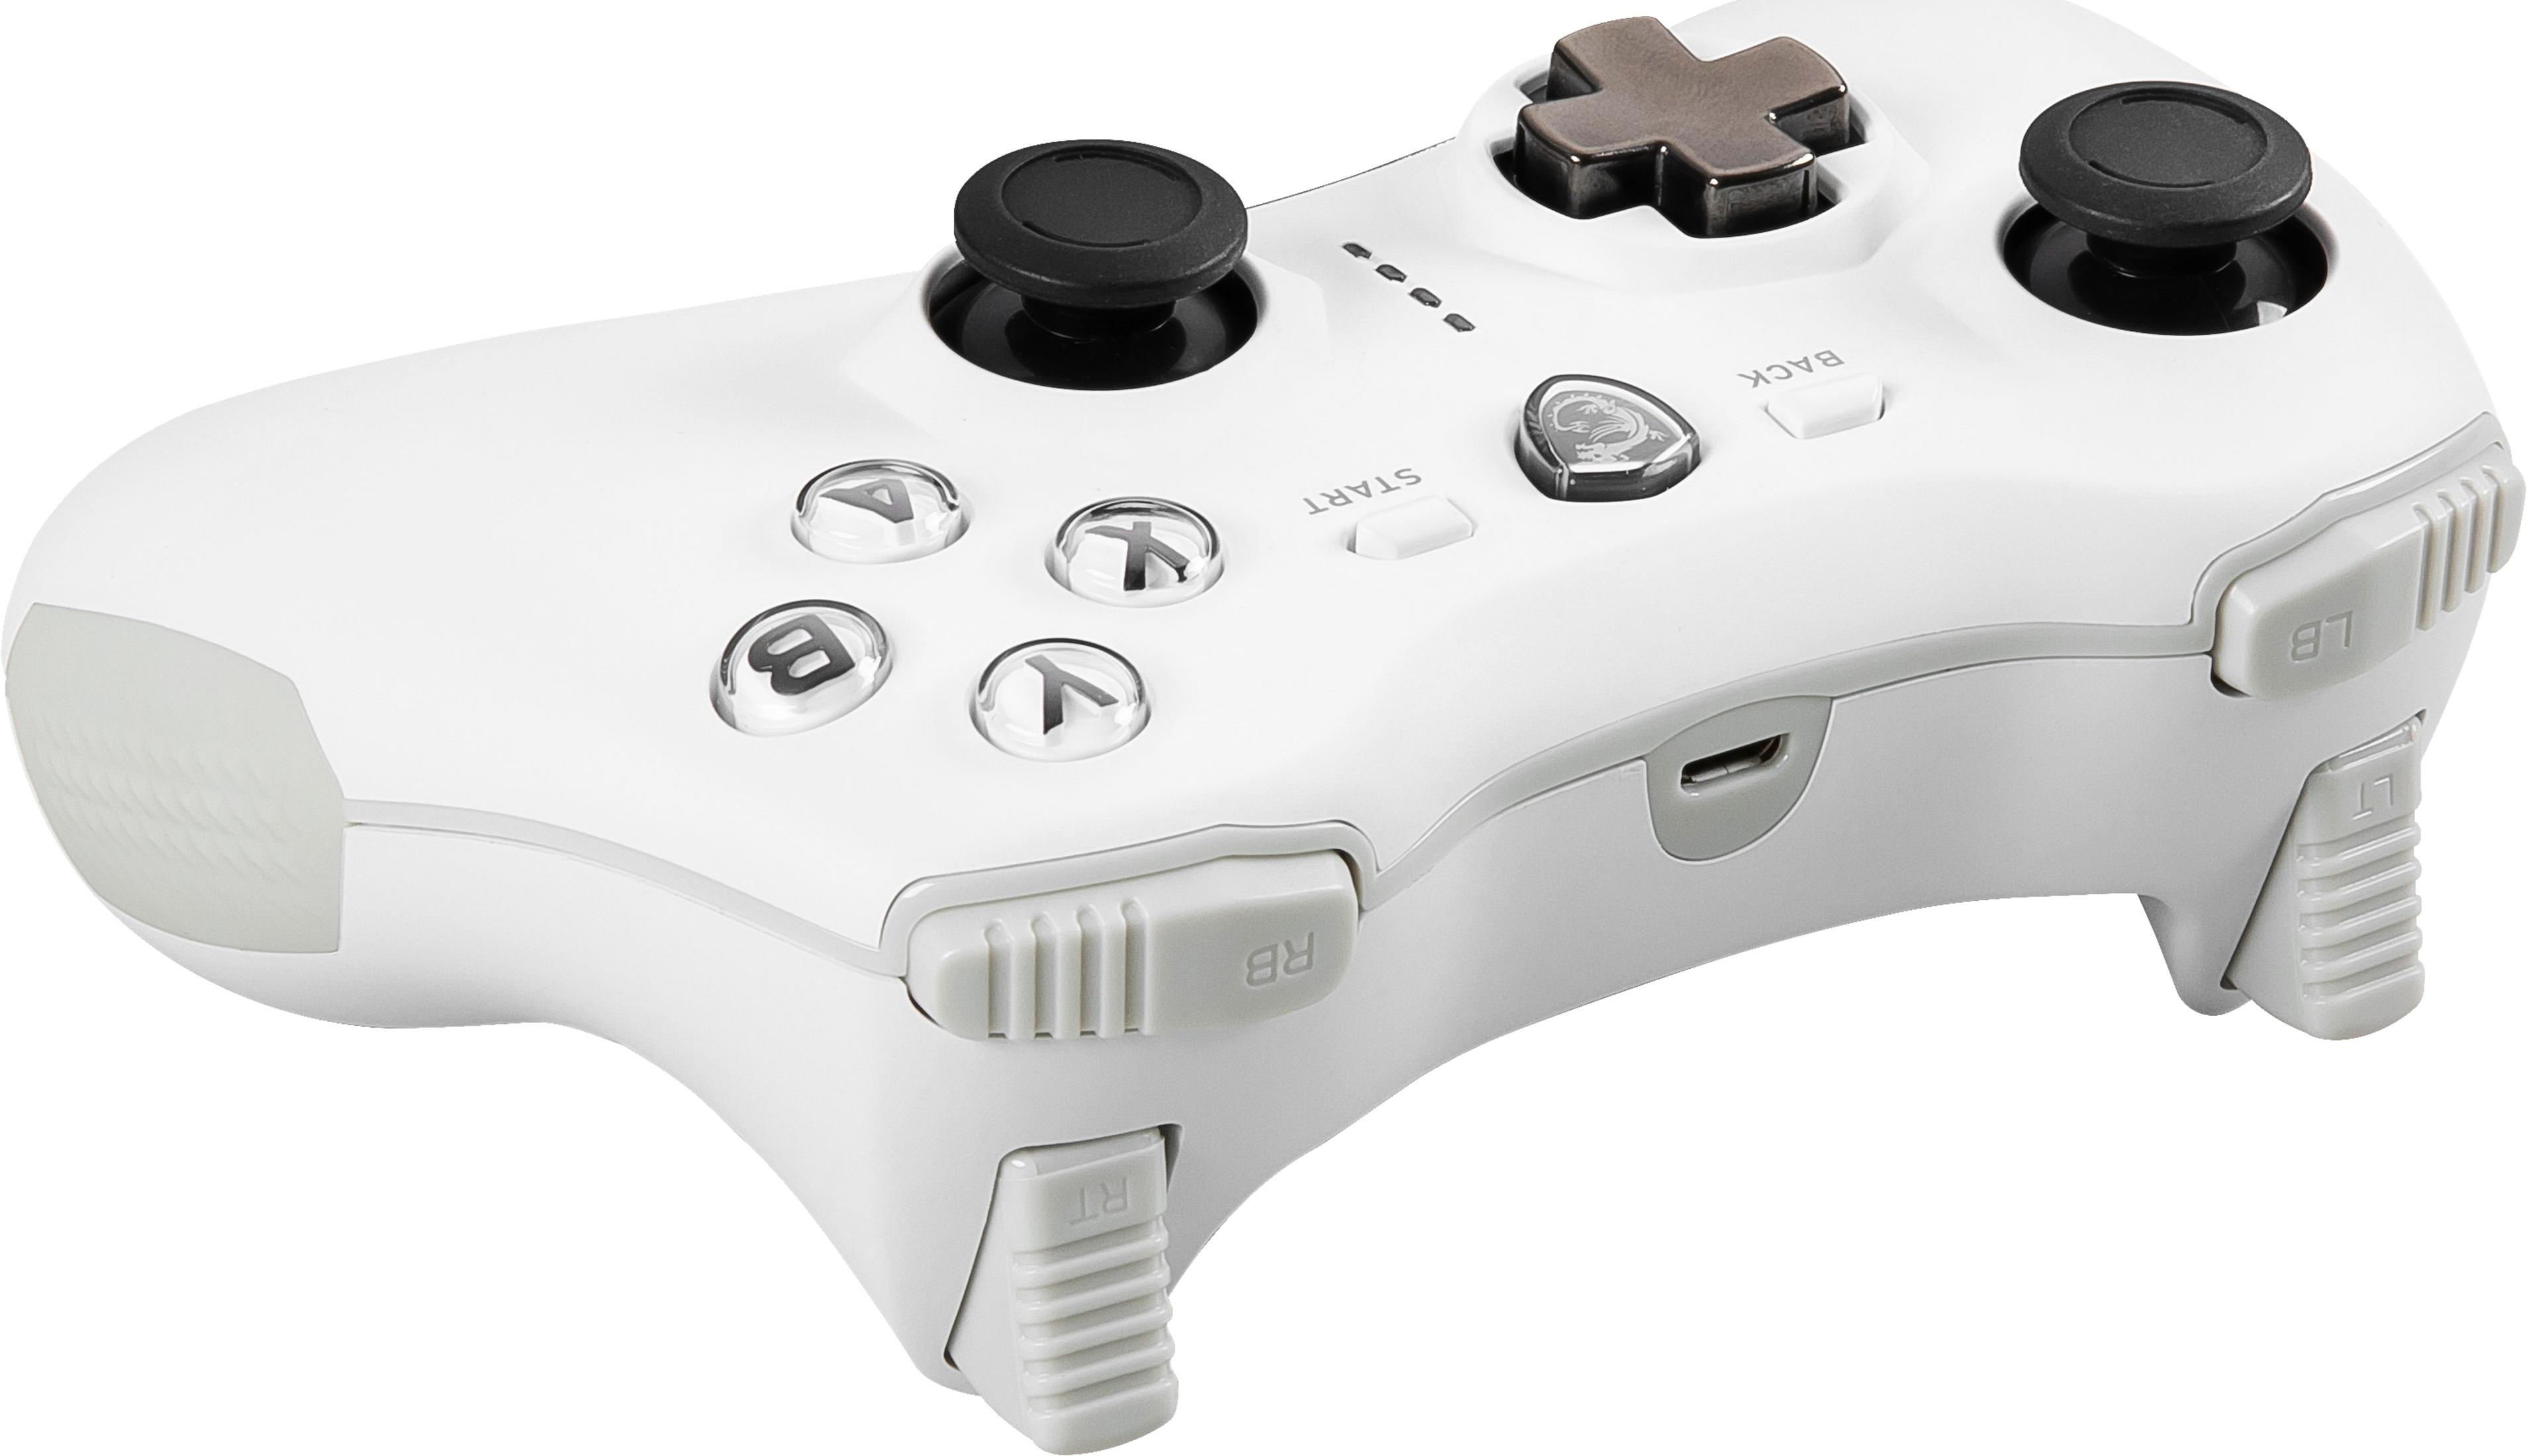 S10-04G0020-EC4 GAME CONTROLLER Game V2 Weiß FORCE GC20 MSI Controller